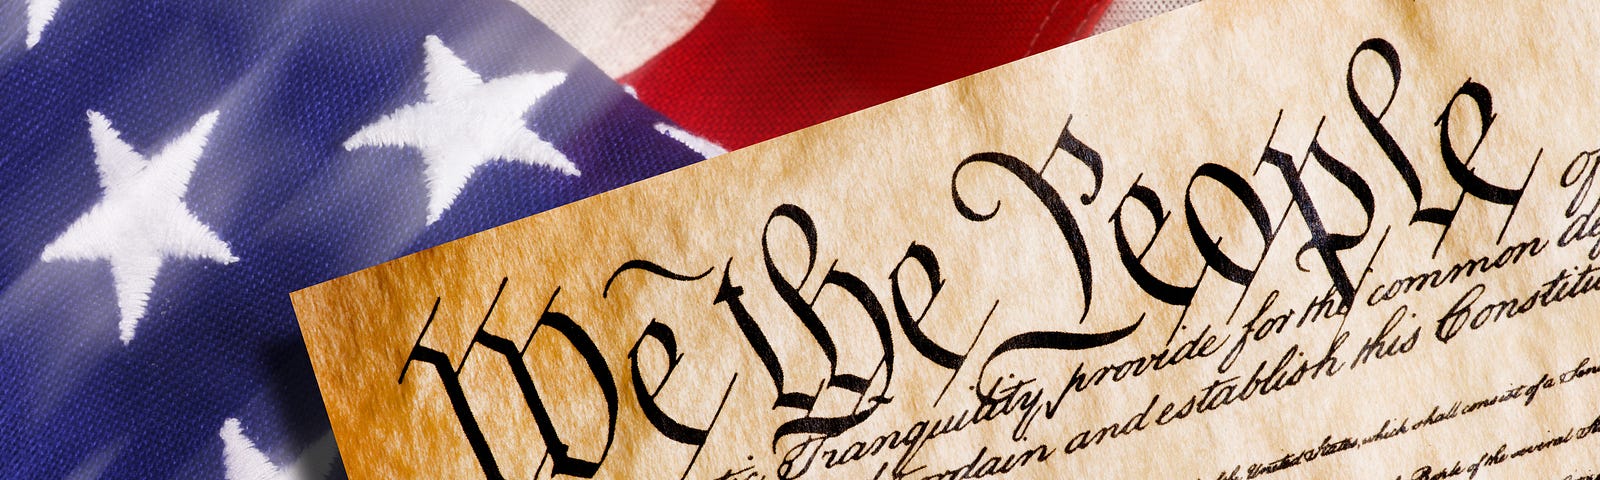 Close-up of an image of the Constitution showing the “We the People” heading. It is laying atop a folding American flag.